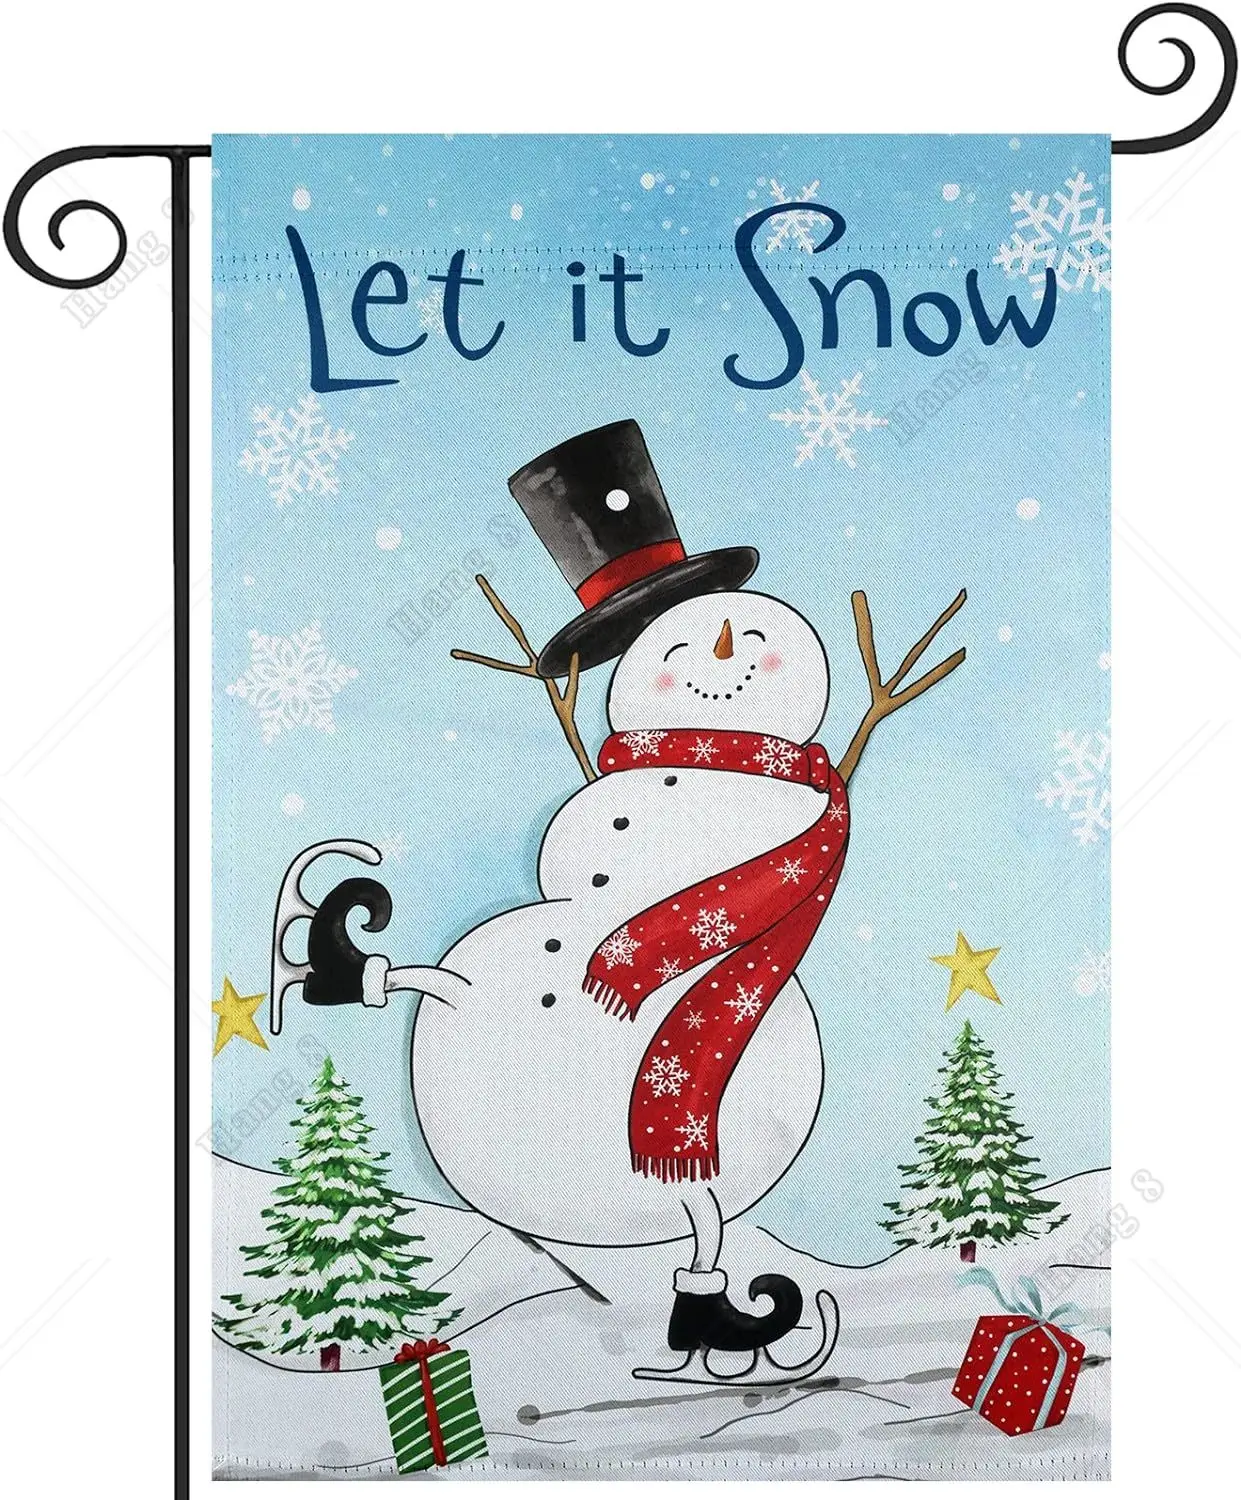 

Snowman Let It Snow Winter Garden Flag Skating Polyester Double Sided 12x18 Inch Yard Flag Outdoor Christmas Decorations